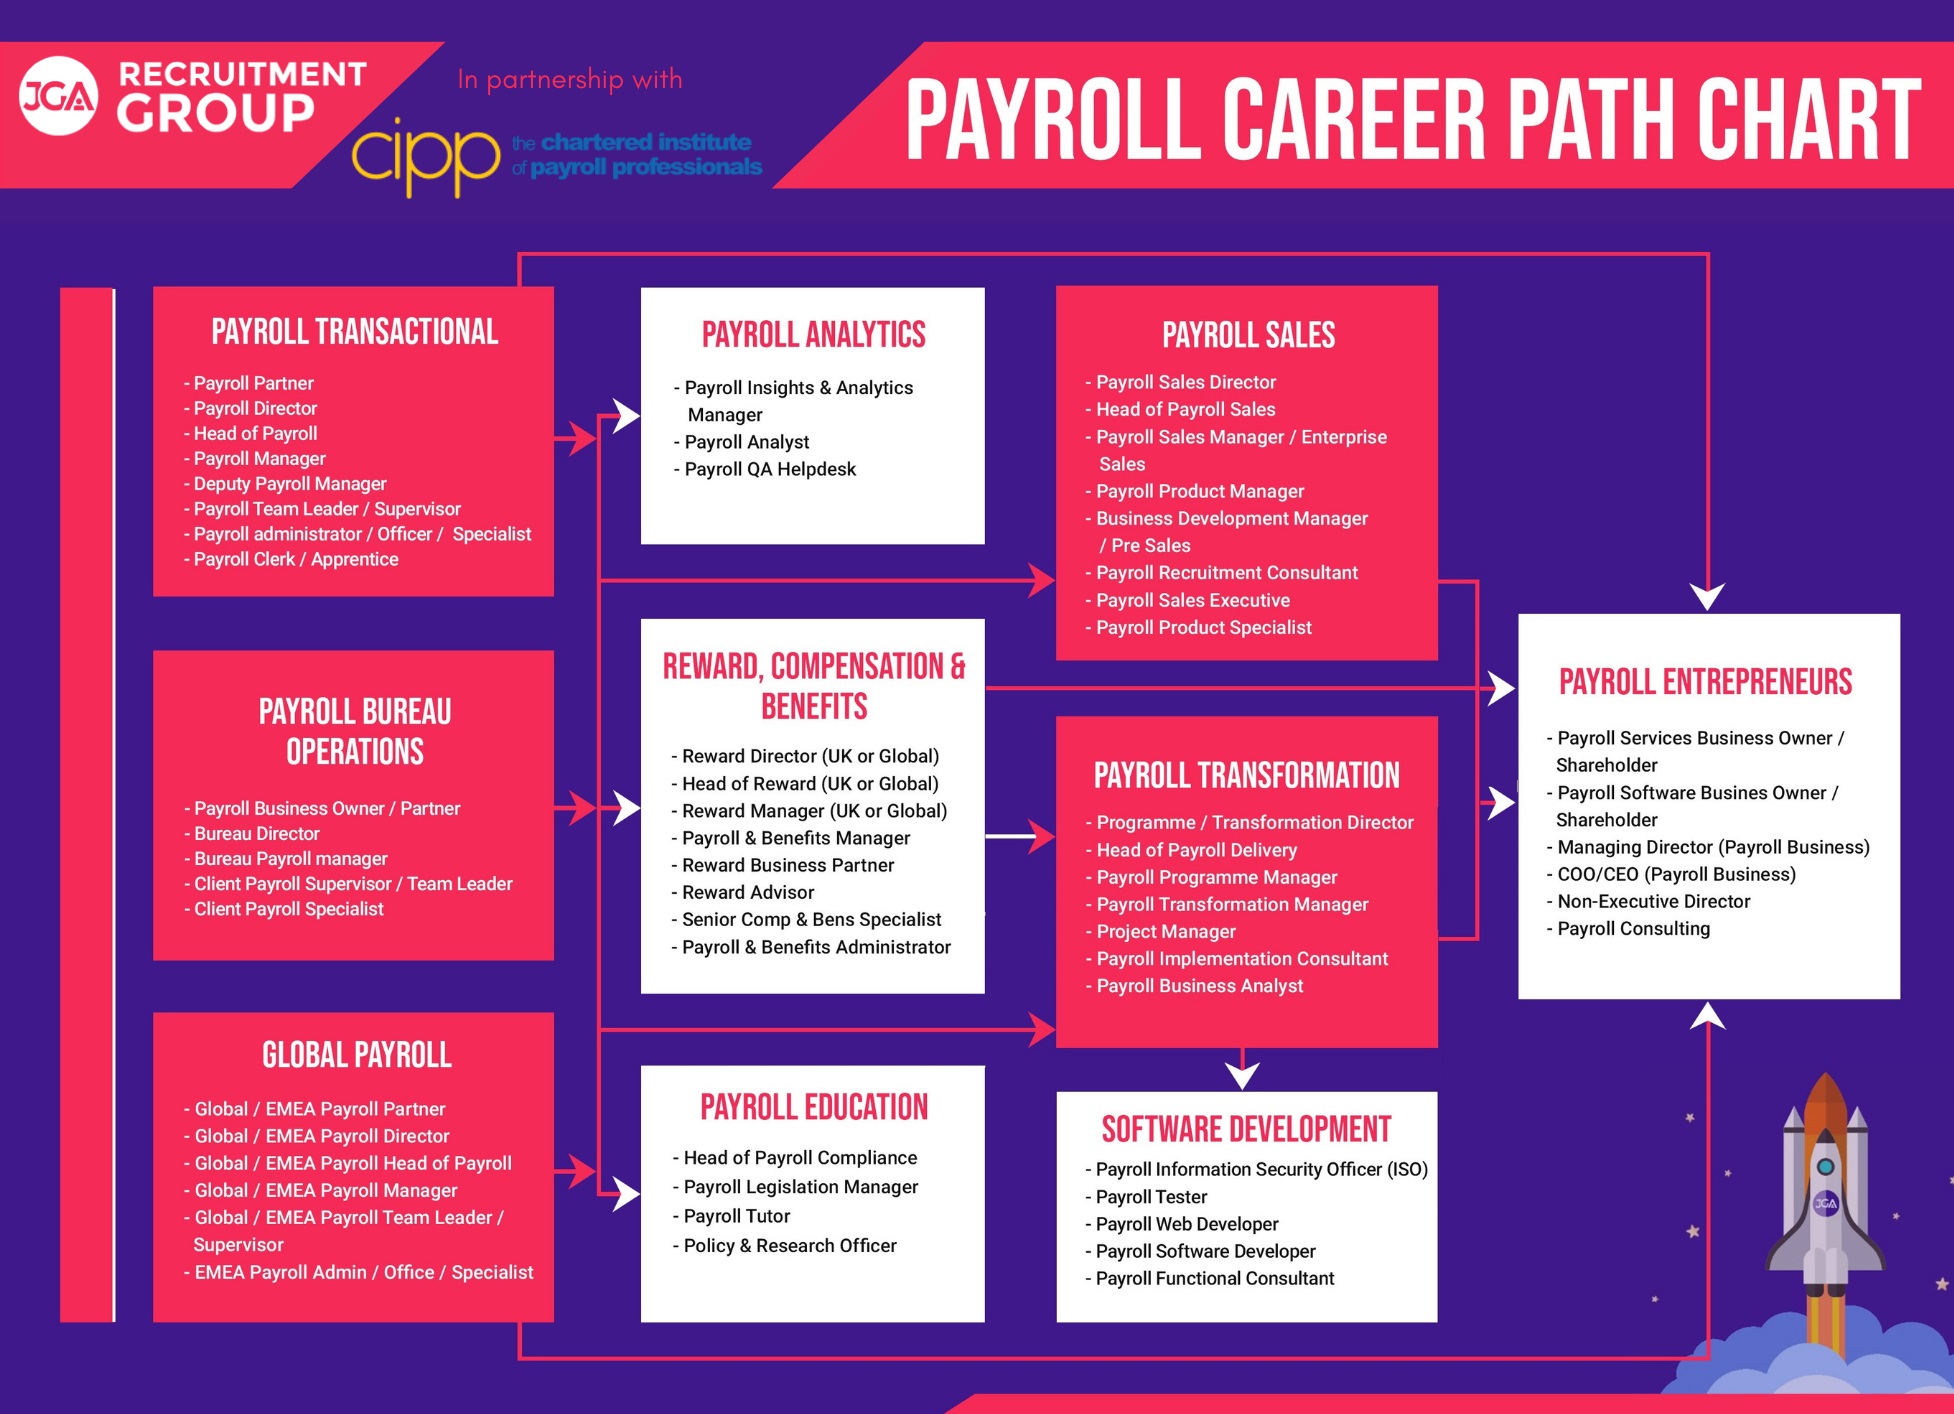 Payroll Career Path Chart in Partnership with CIPP.jpg